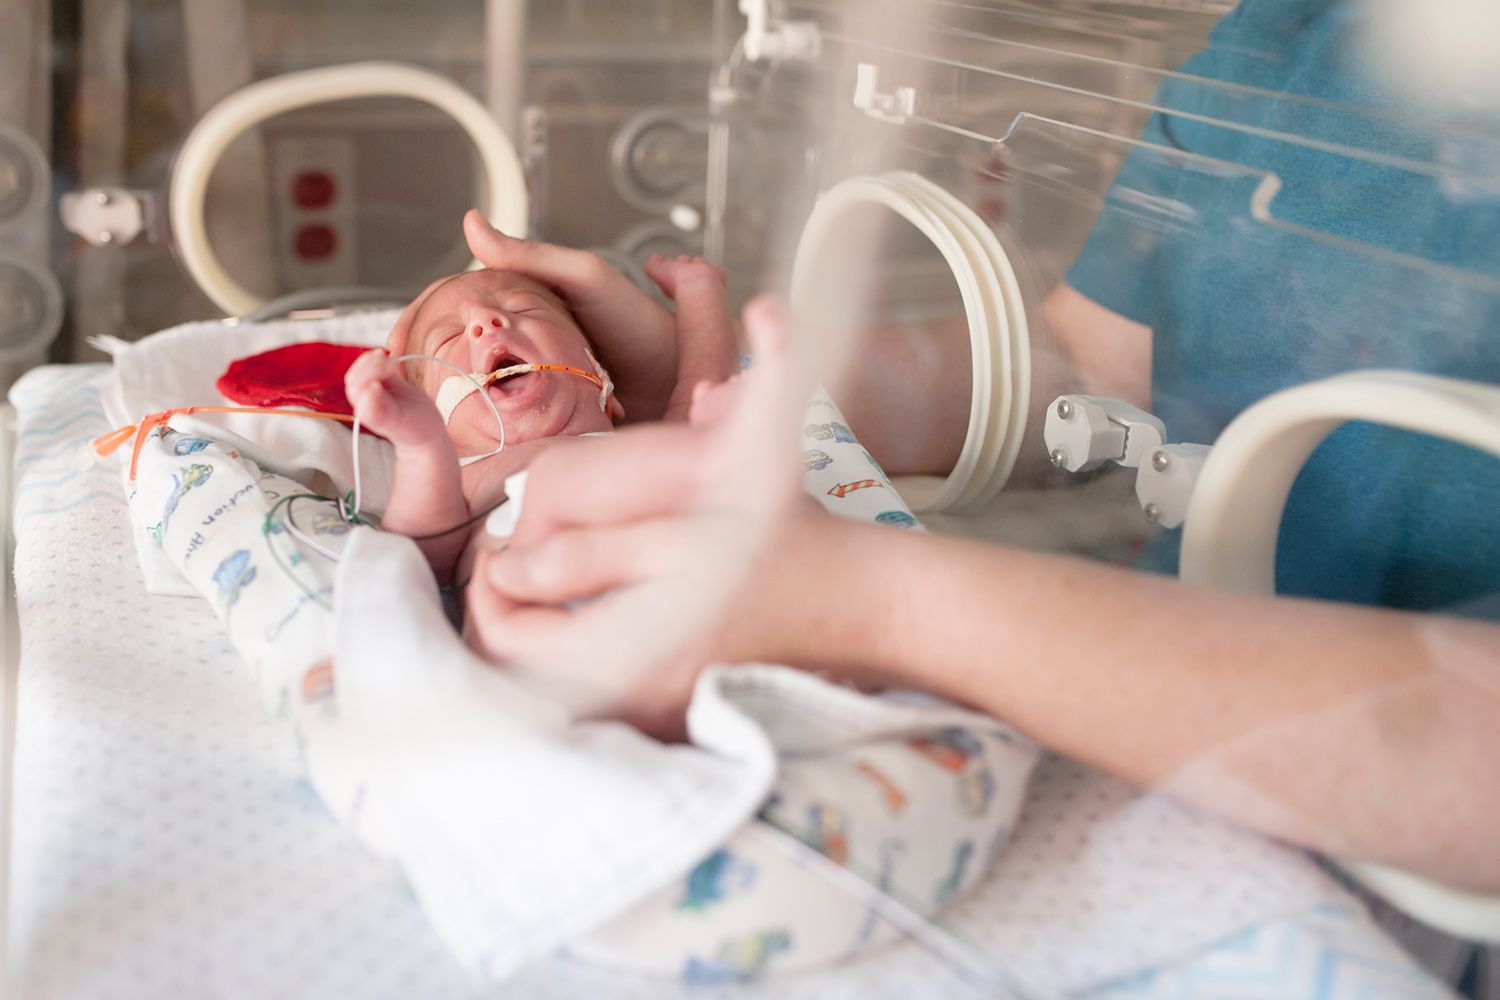 New Research May Lead to Changes in the Care of Nano-preterm